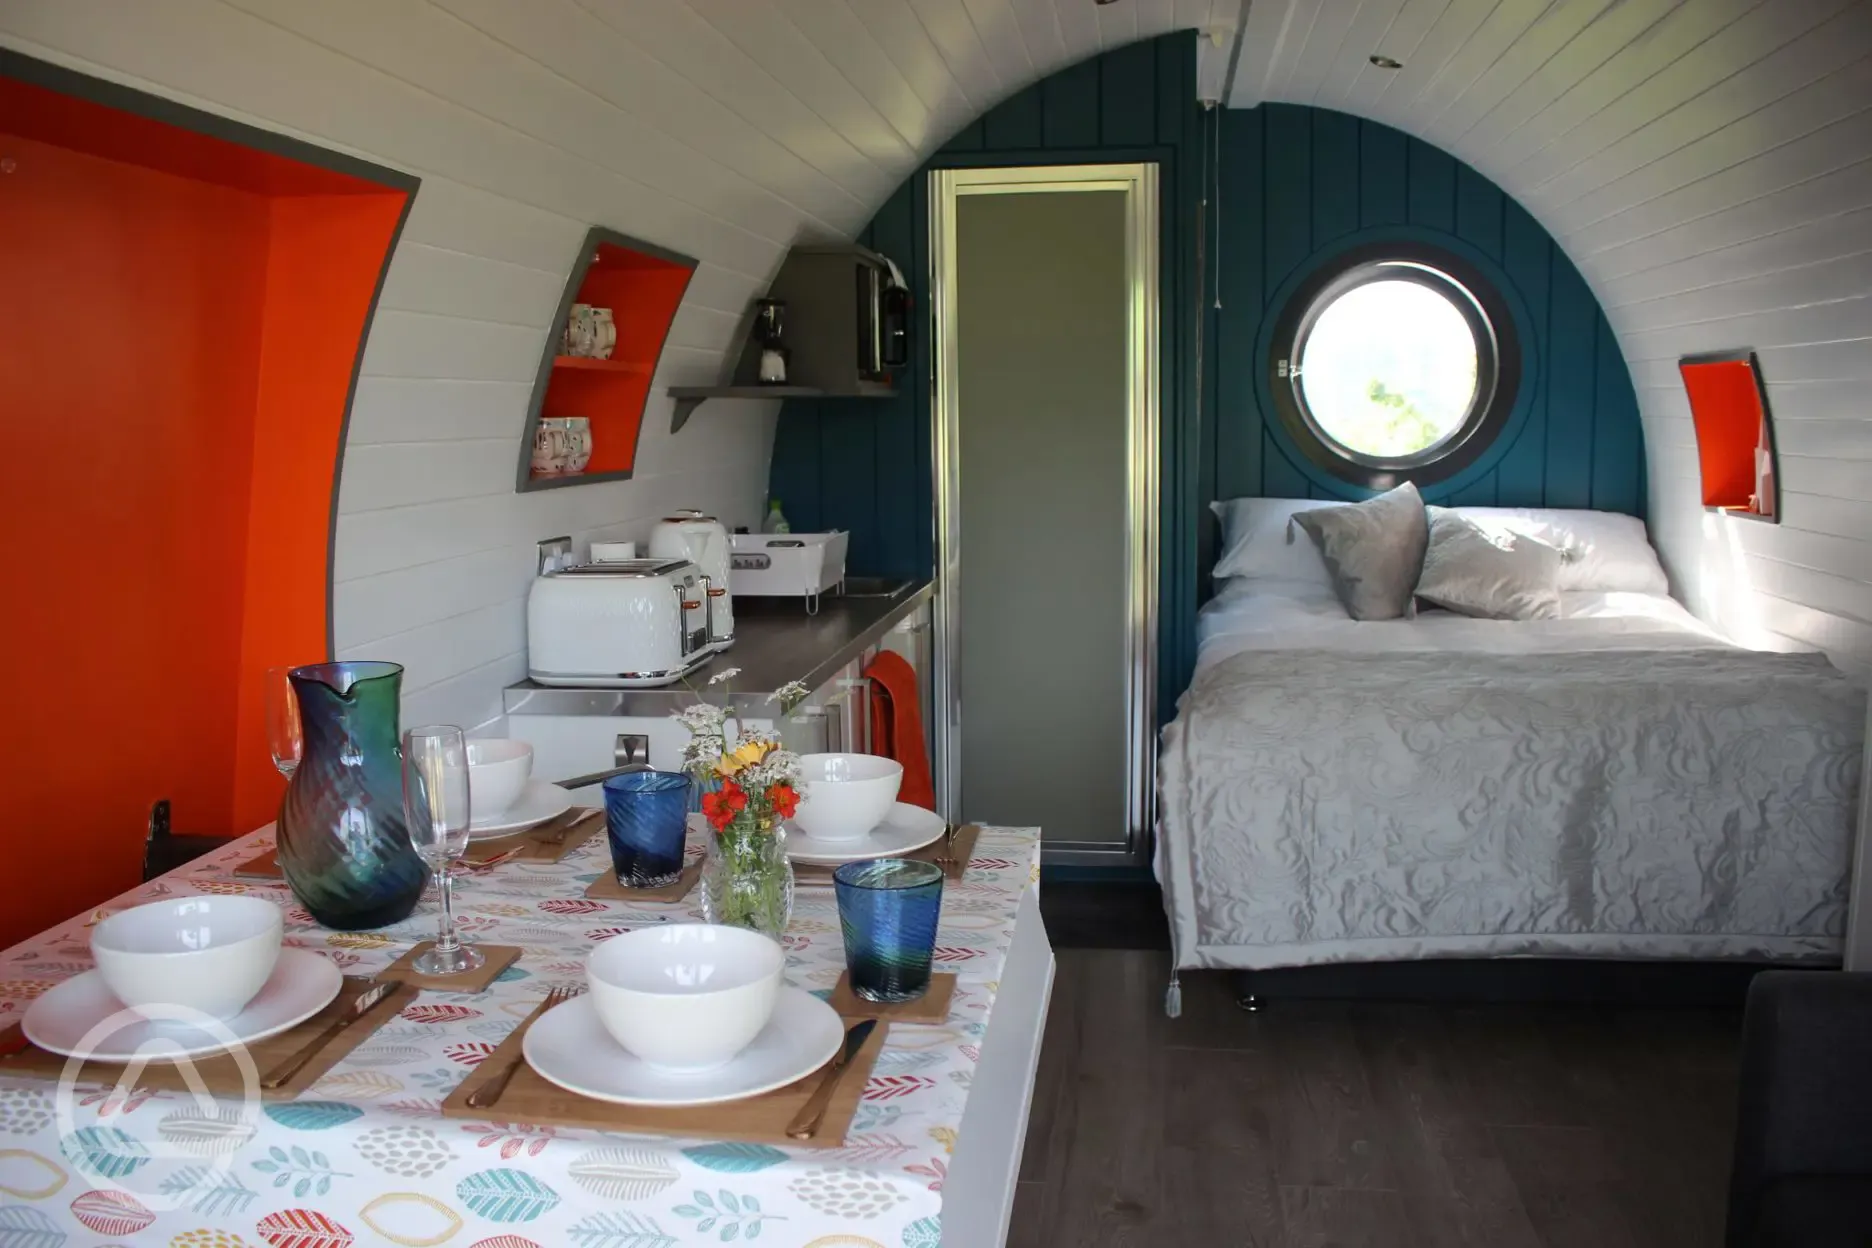 En-suite glamping pod at Stackpole Under the Stars